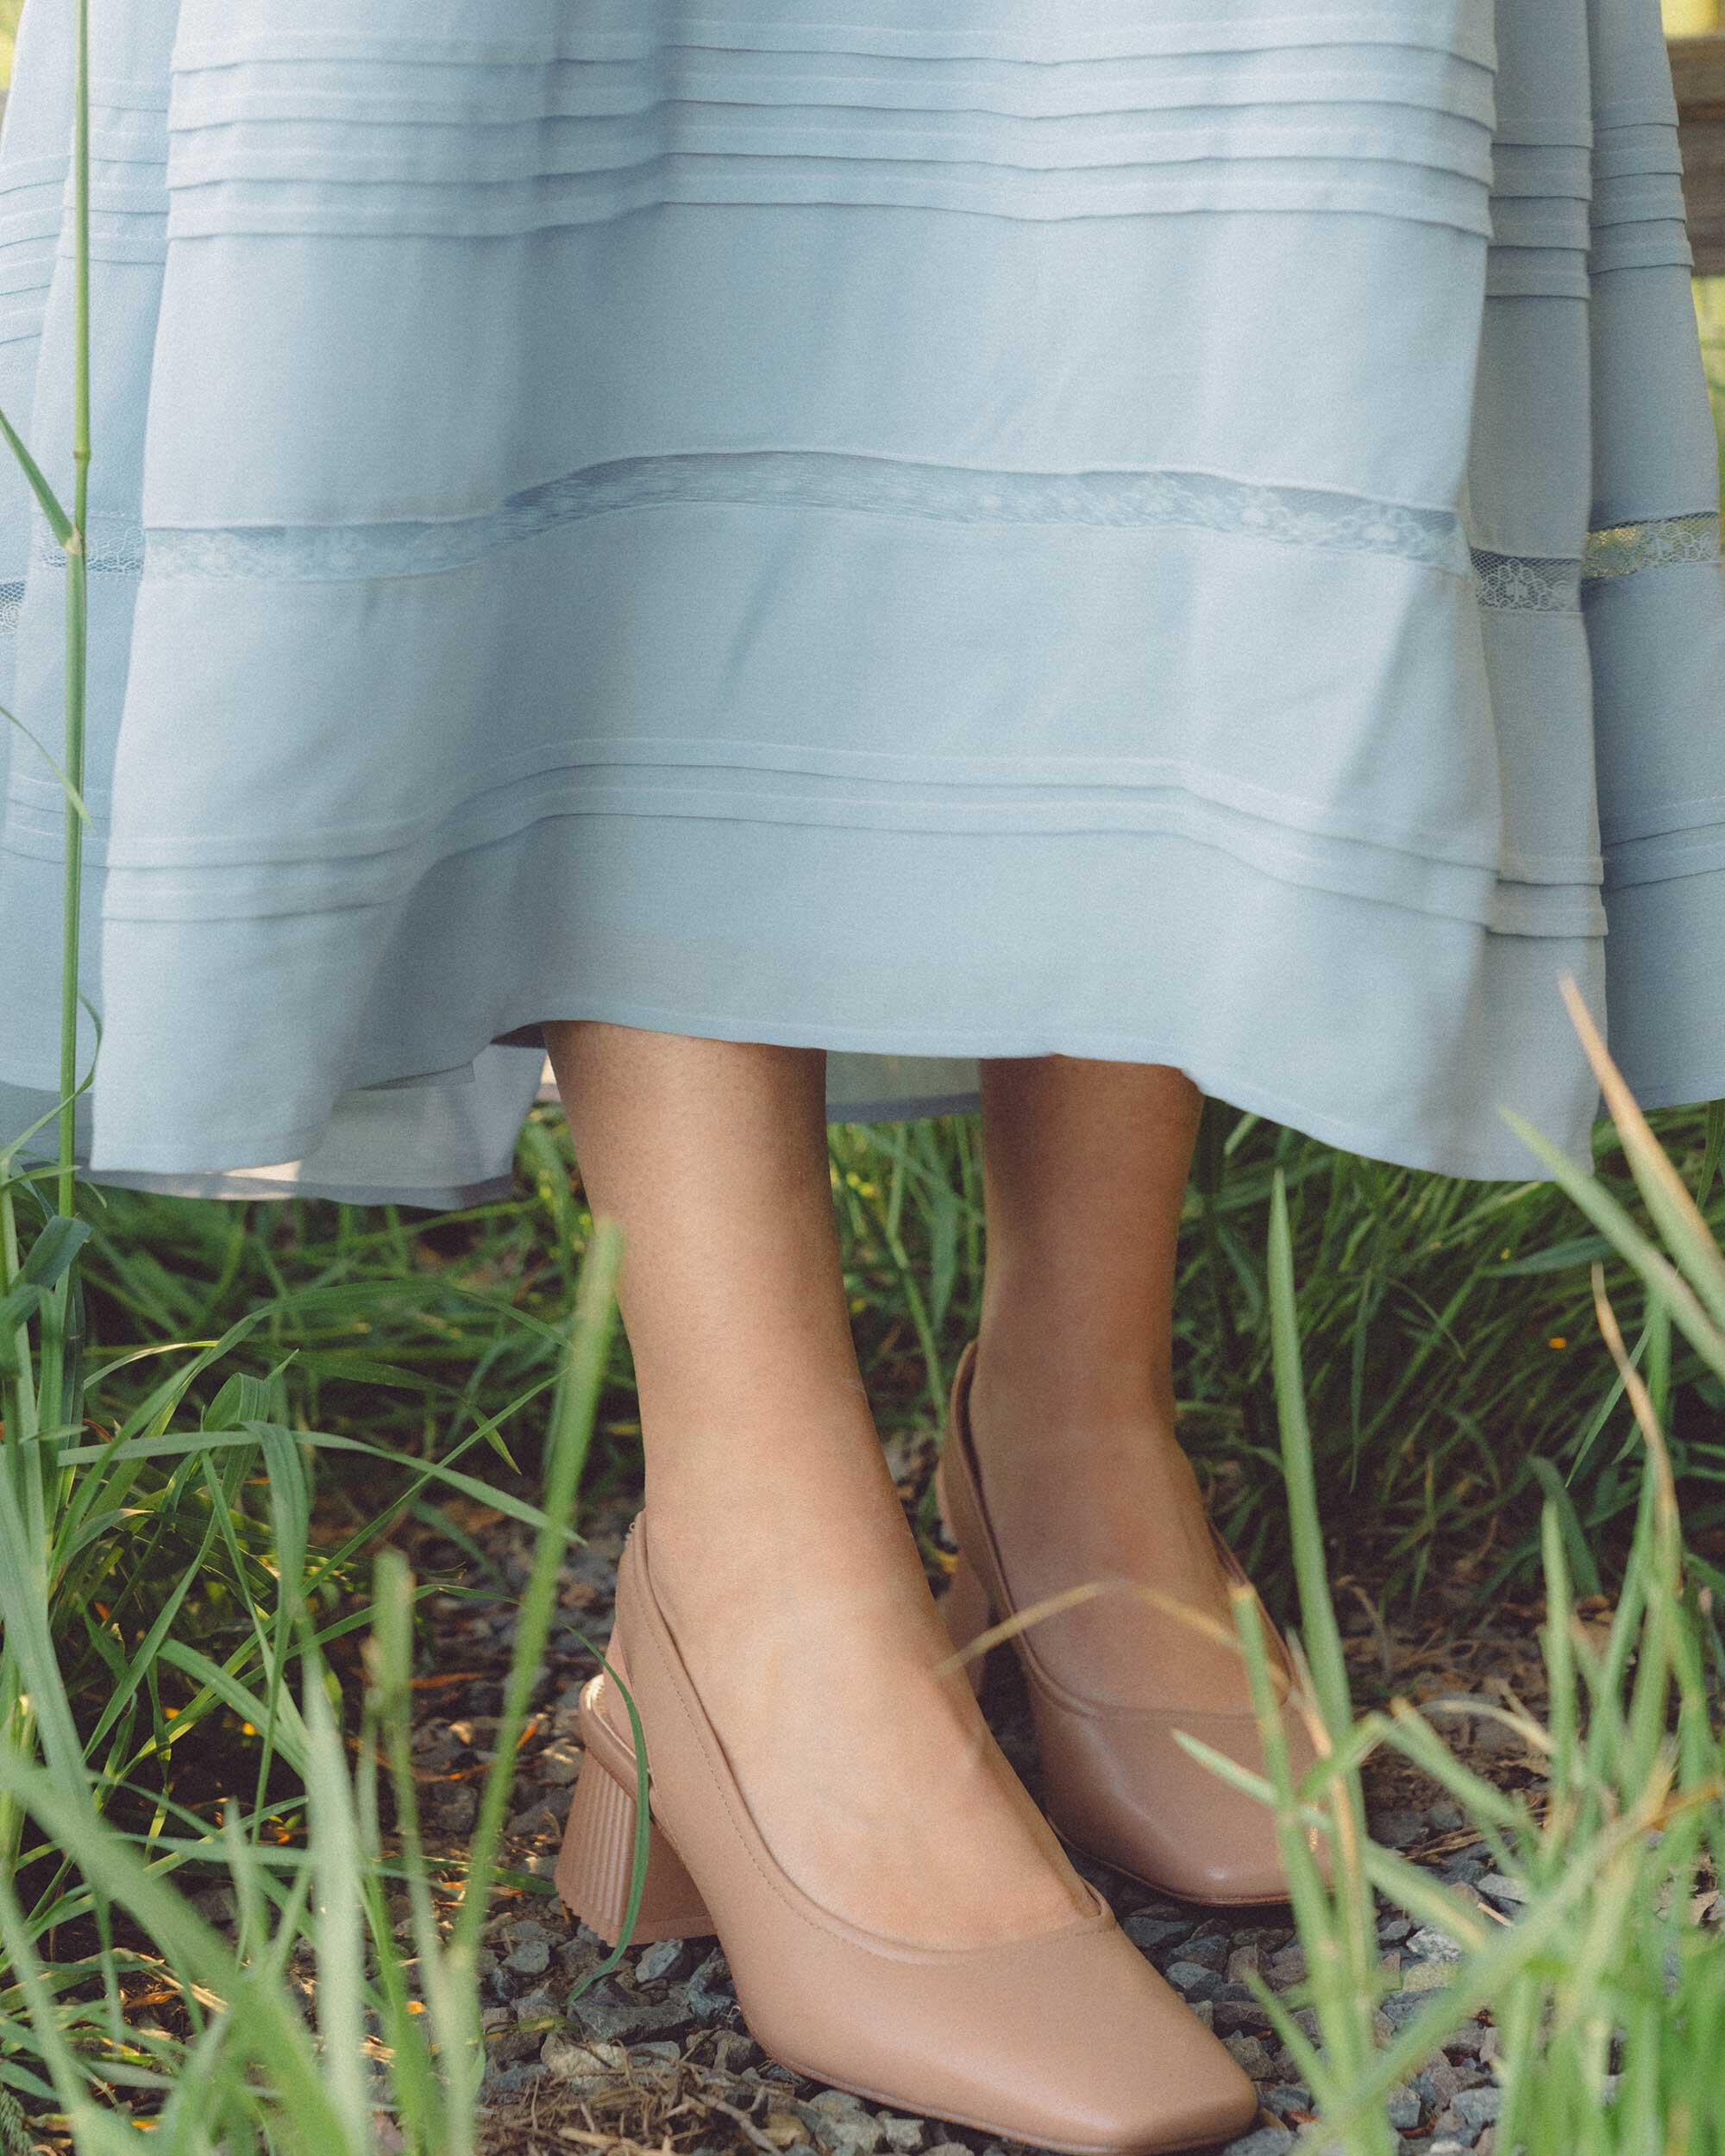 Cute cottage style summer dress. Sarah Butler of @sarahchristine wearing Reformation Jessy Blue Long Sleeve Smocked Dress with lace detailing and Sam Edelman Toren Square Toe Block Heel in countryside field of Seattle, Washington - 5.jpg